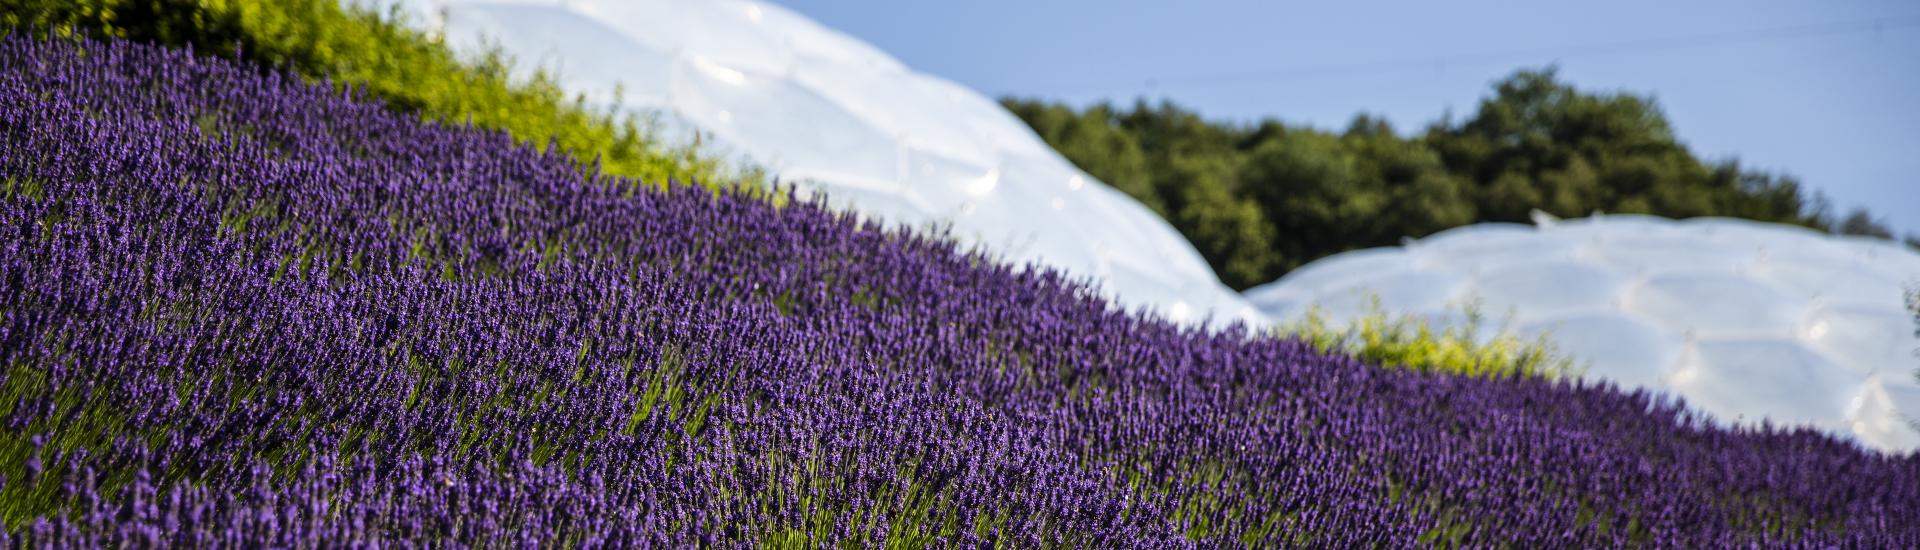 Swathes of lavender in front of the Eden Project's Biomes